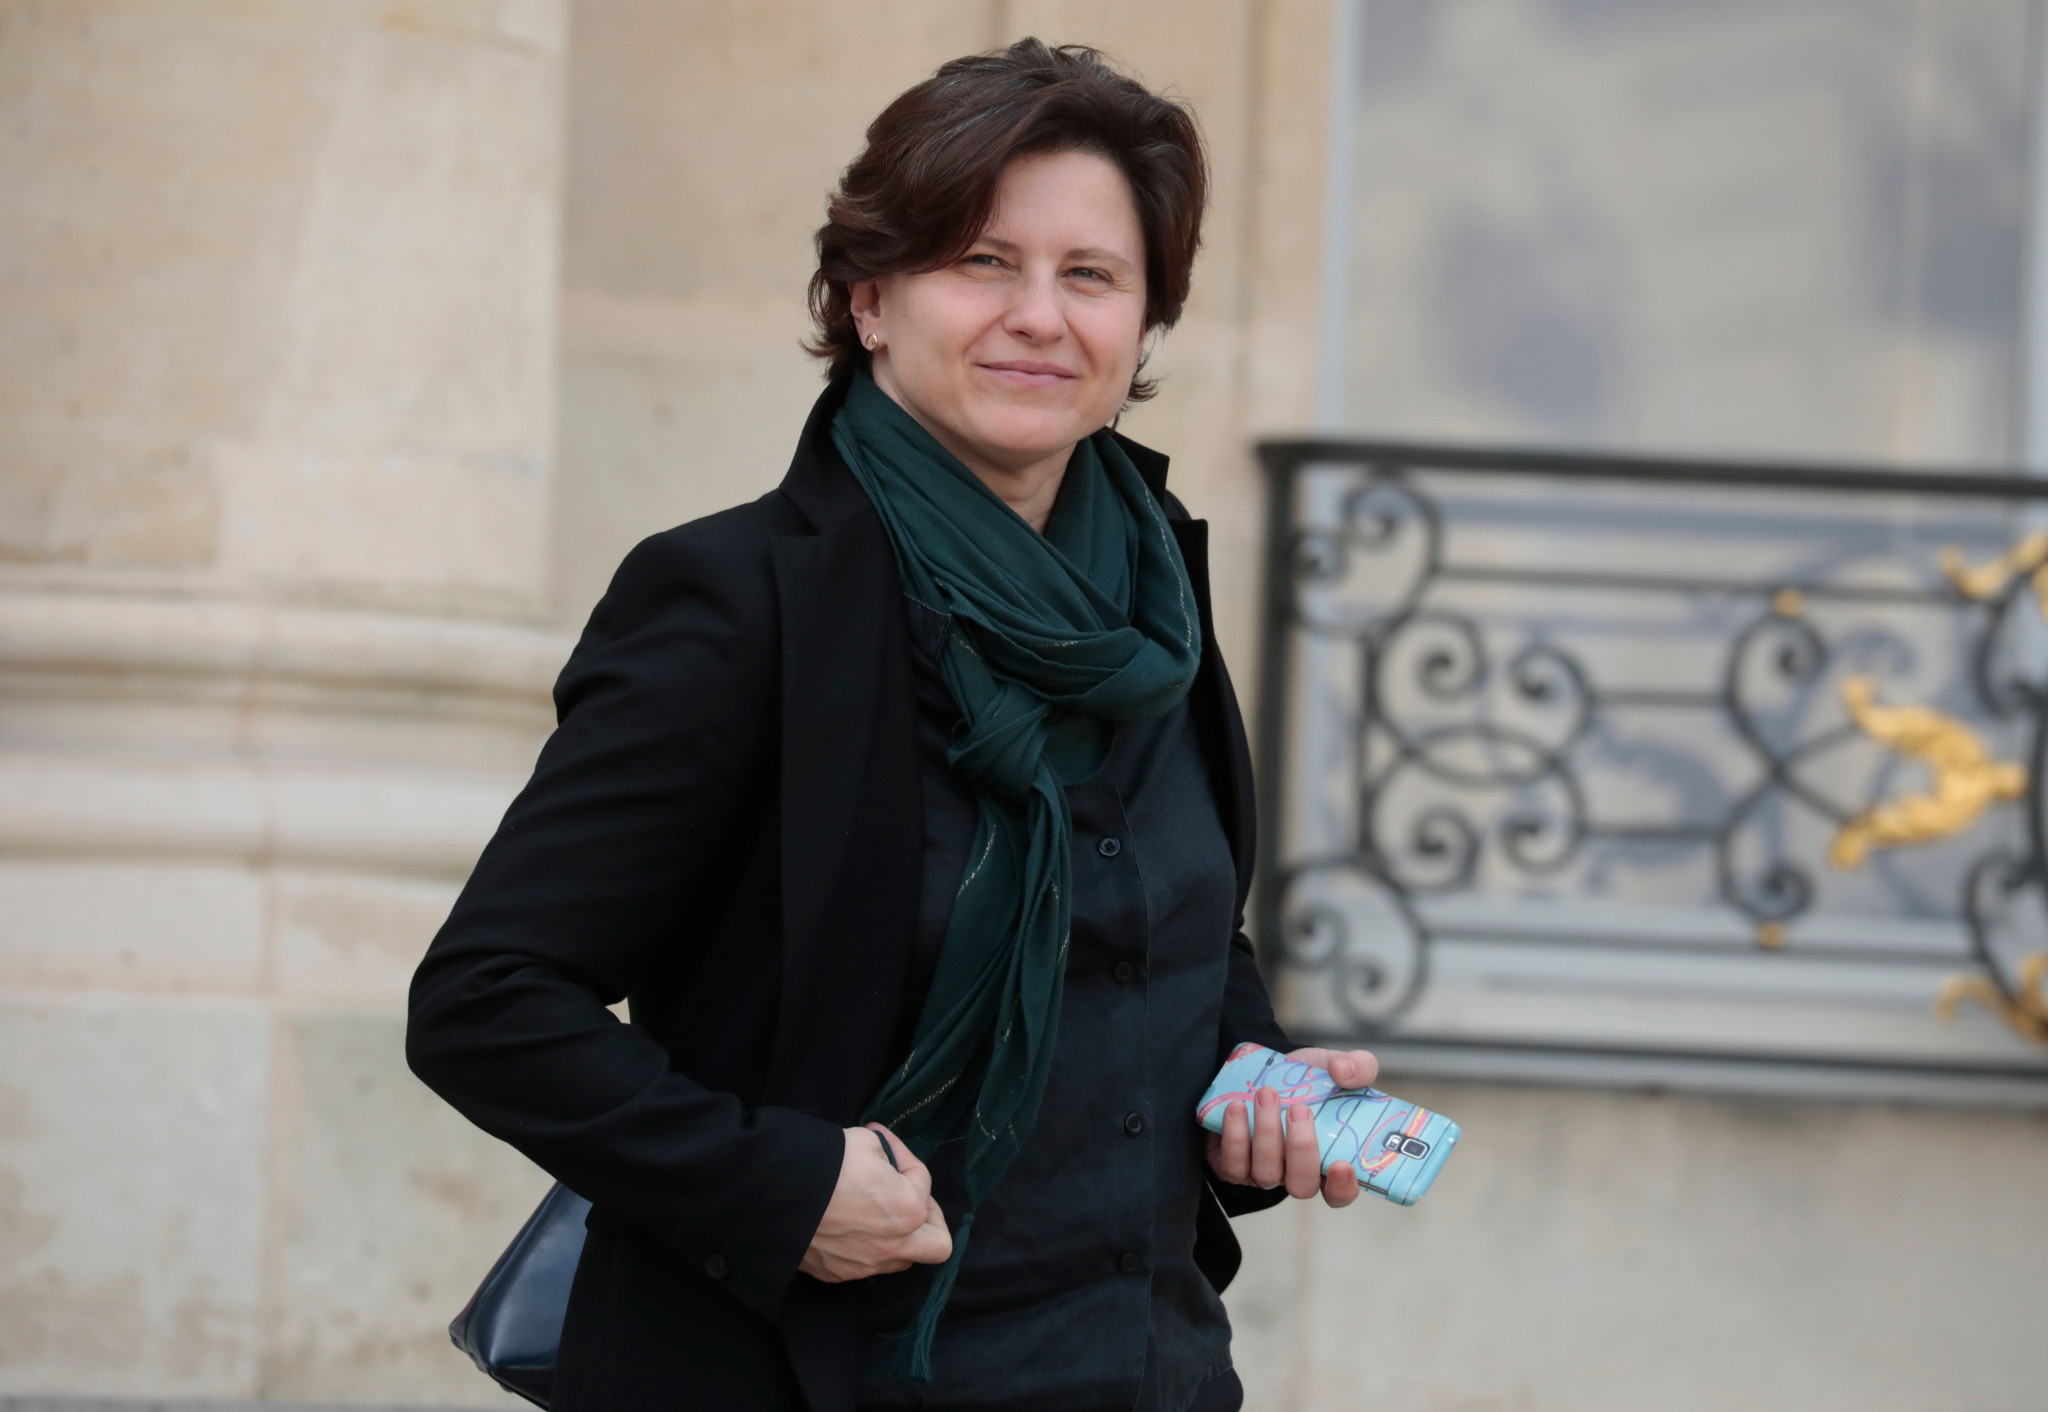 French Sports Minister Roxana Maracineanu has given the project her support ©Getty Images